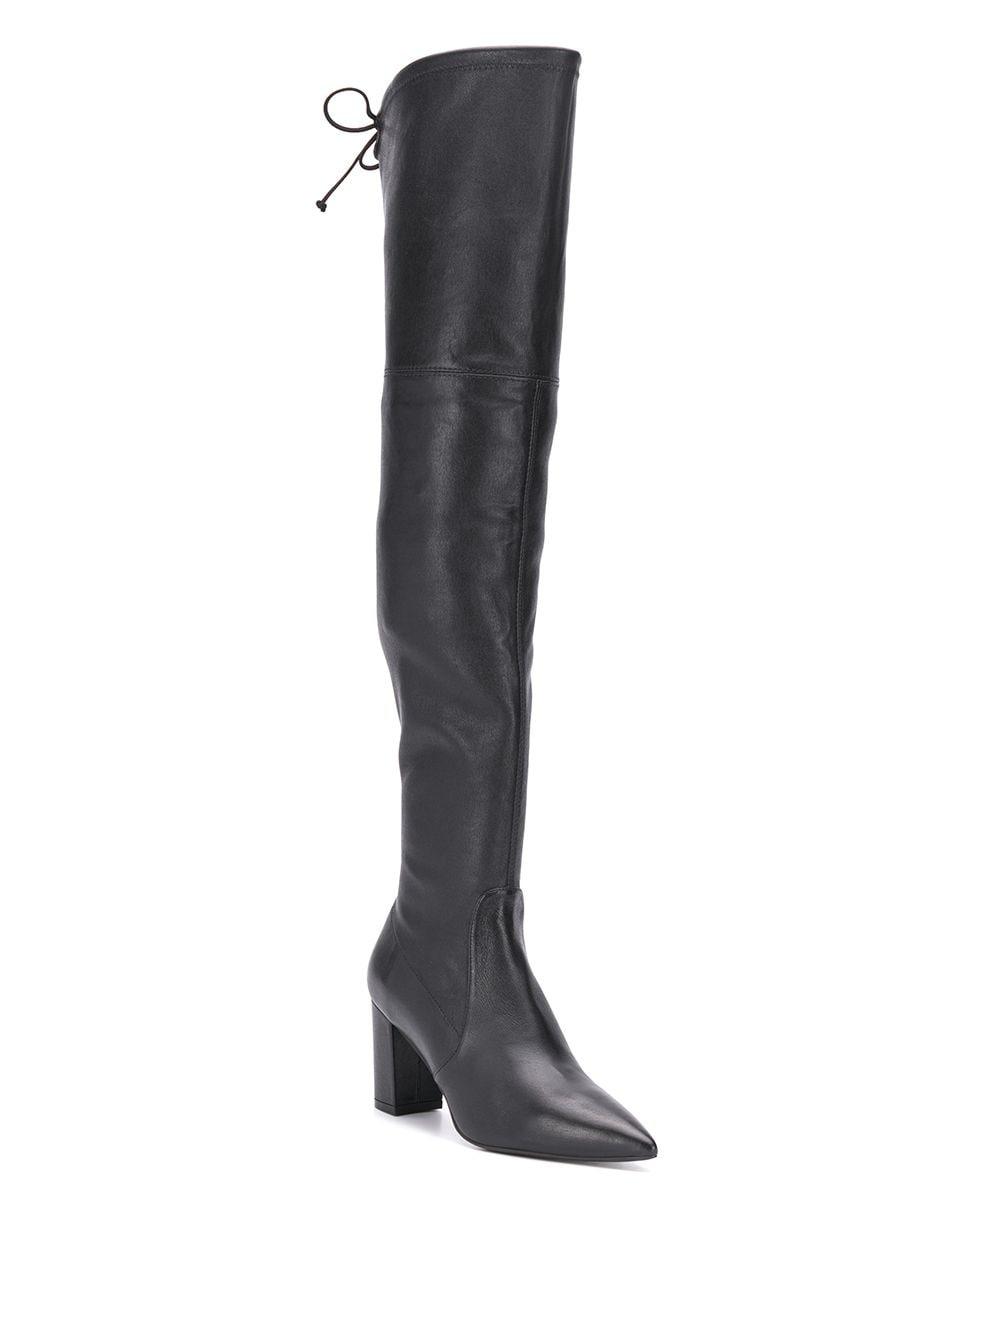 Stuart Weitzman Leather Lesley 75 Knee-high Boots in Black - Lyst